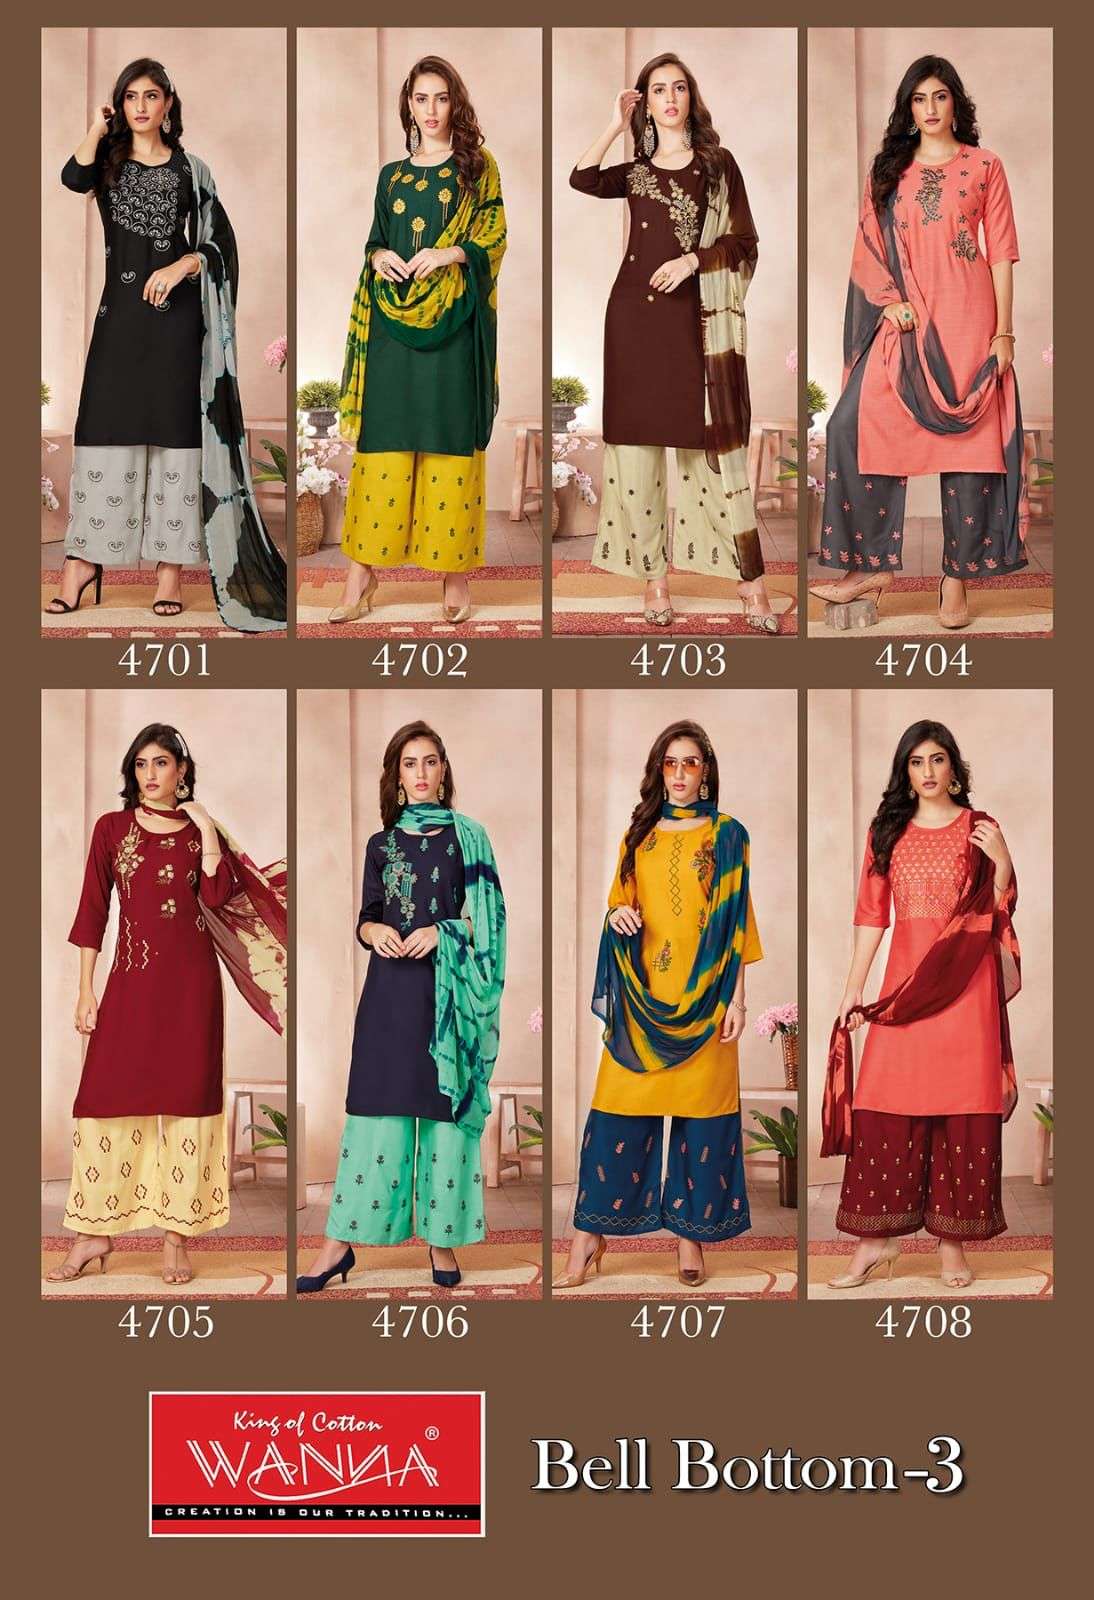 Bell Bottom 3 By Wanna Look Premium Rayon Wholesale Supplier Online Lowest Price Cheapest Kurtis Palazzo  At Saidharanx